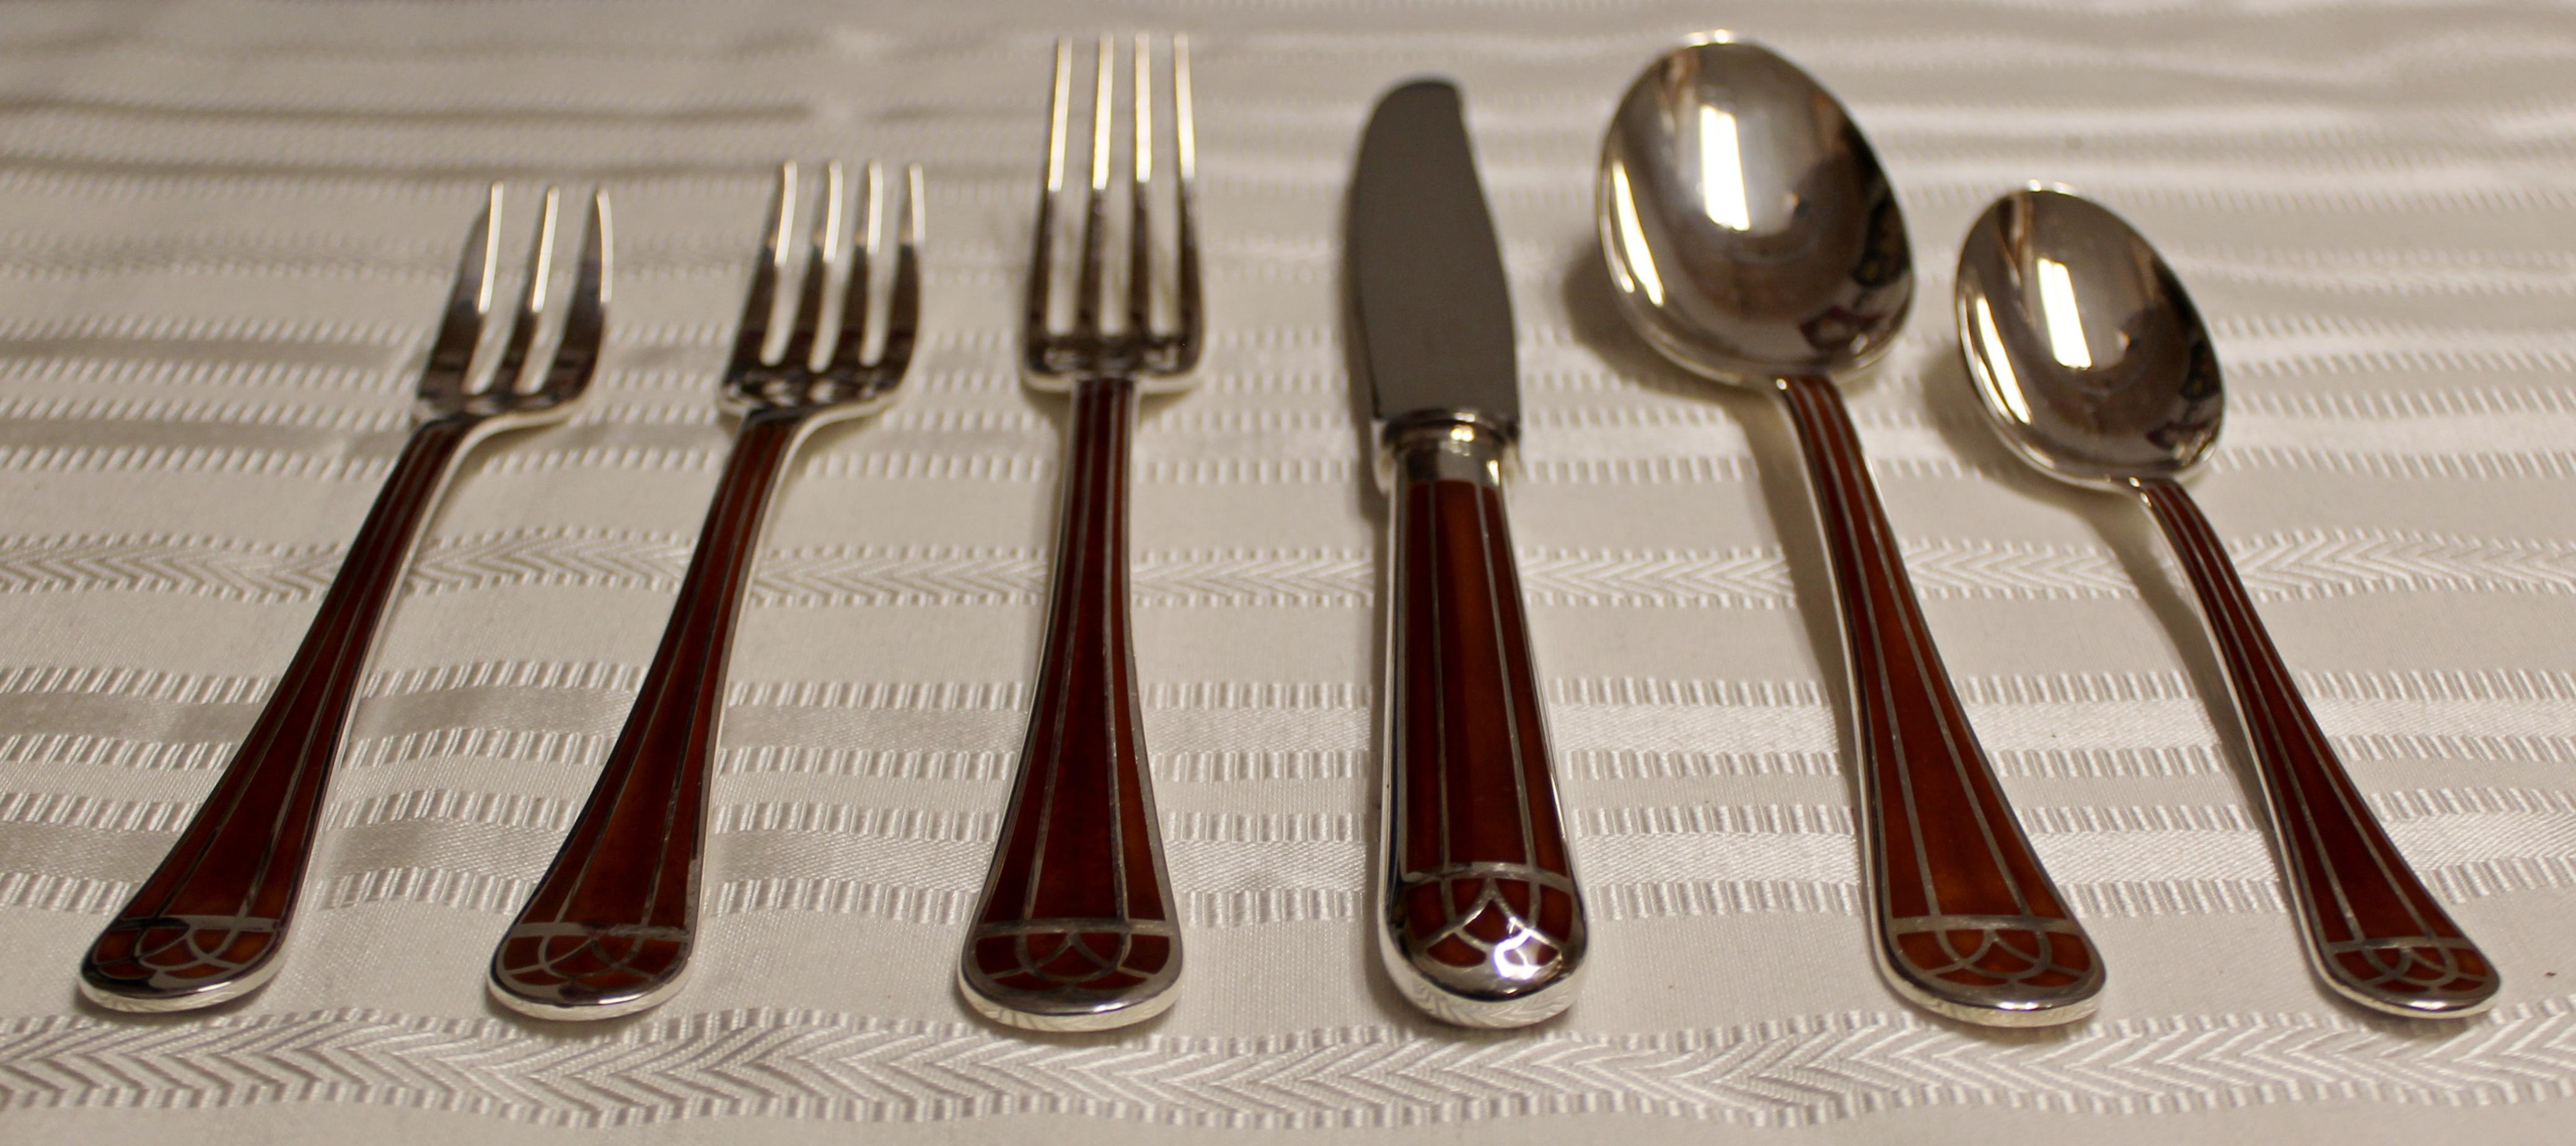 For your consideration is a magnificent set of inlaid flatware, 6 pc setting, service for 8, by Christofle, made in France, circa 1910s. In excellent condition. The knives are 9